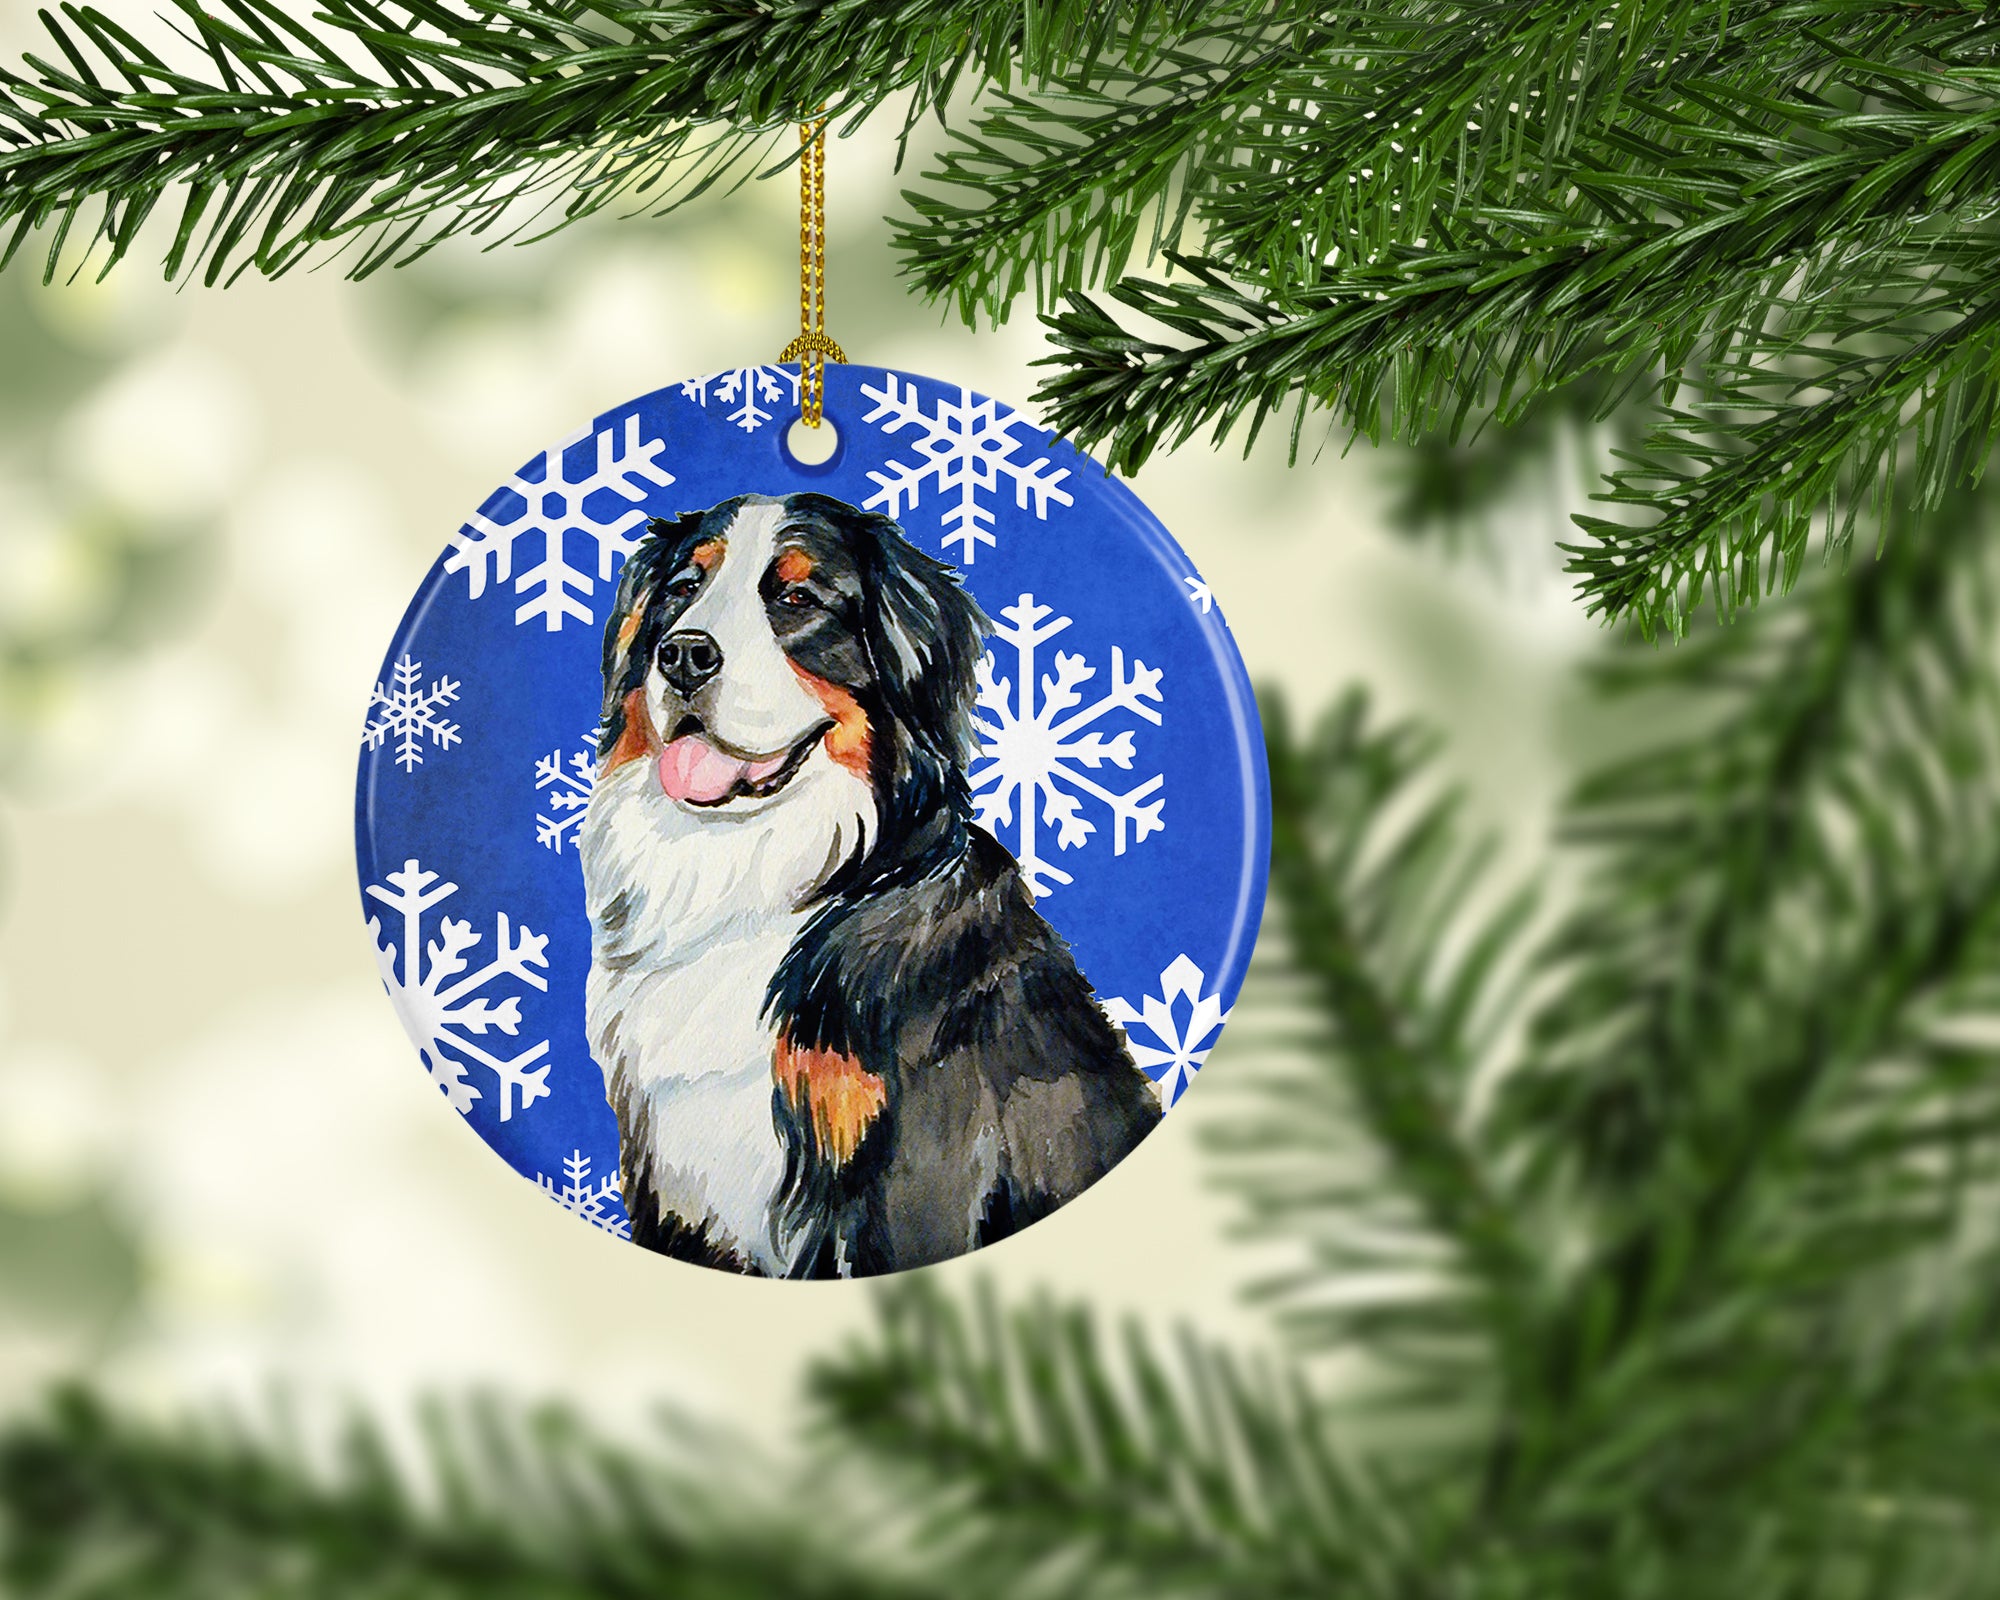 Bernese Mountain Dog Winter Snowflake Holiday Ceramic Ornament LH9289 - the-store.com